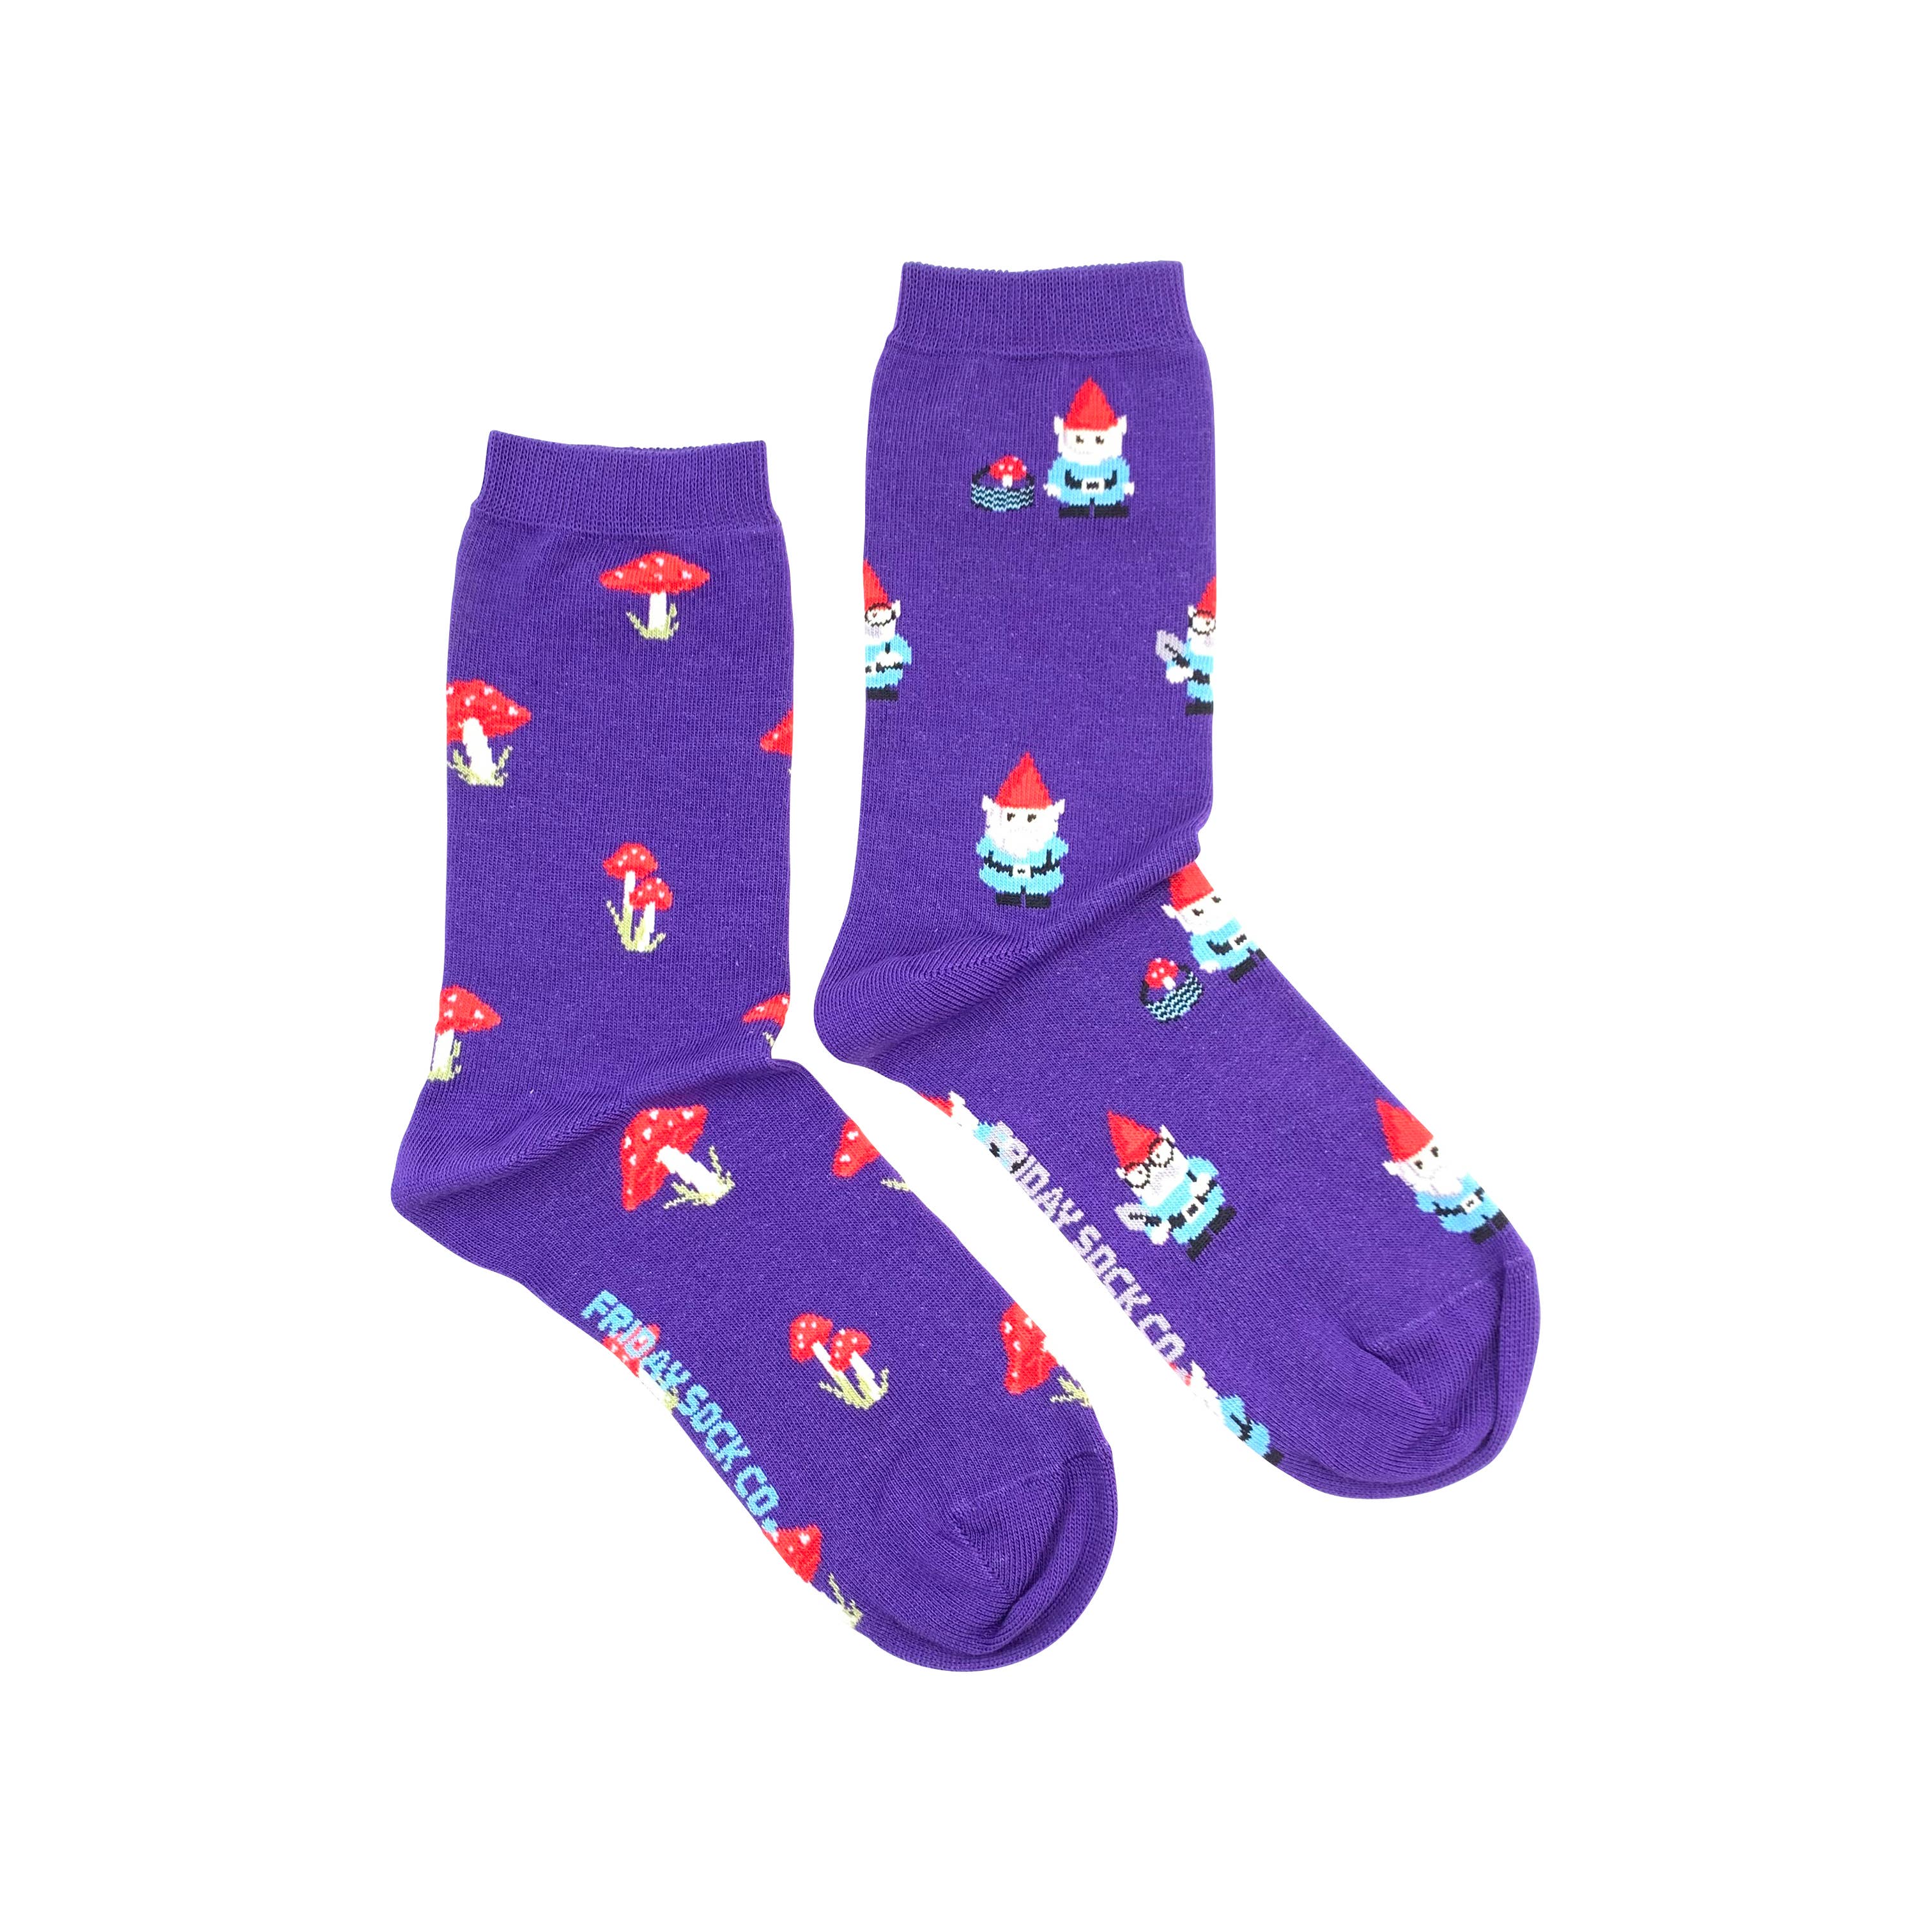 Friday Sock Co. - Women’s Socks | Gnome and Mushroom | Mismatched